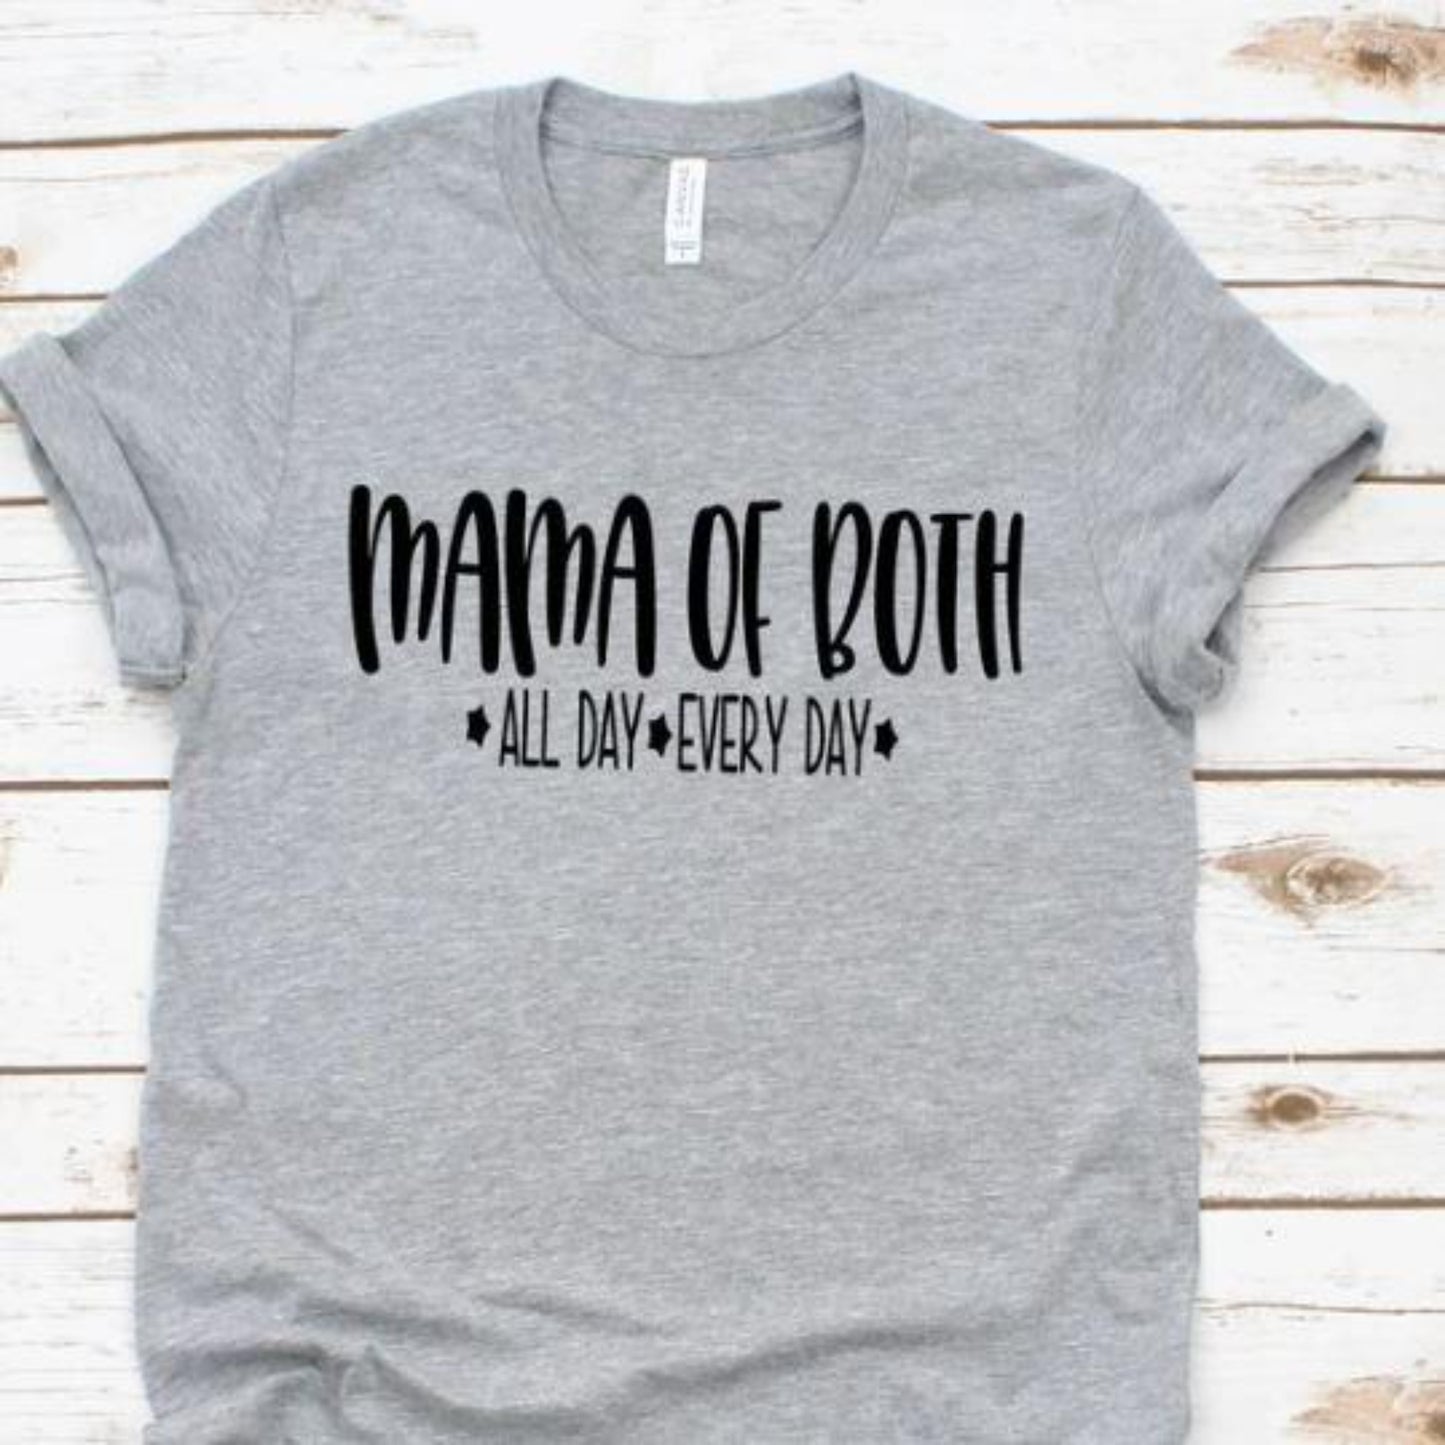 mama_of_both specialty tee all day tshirt everyday wear casual shirt